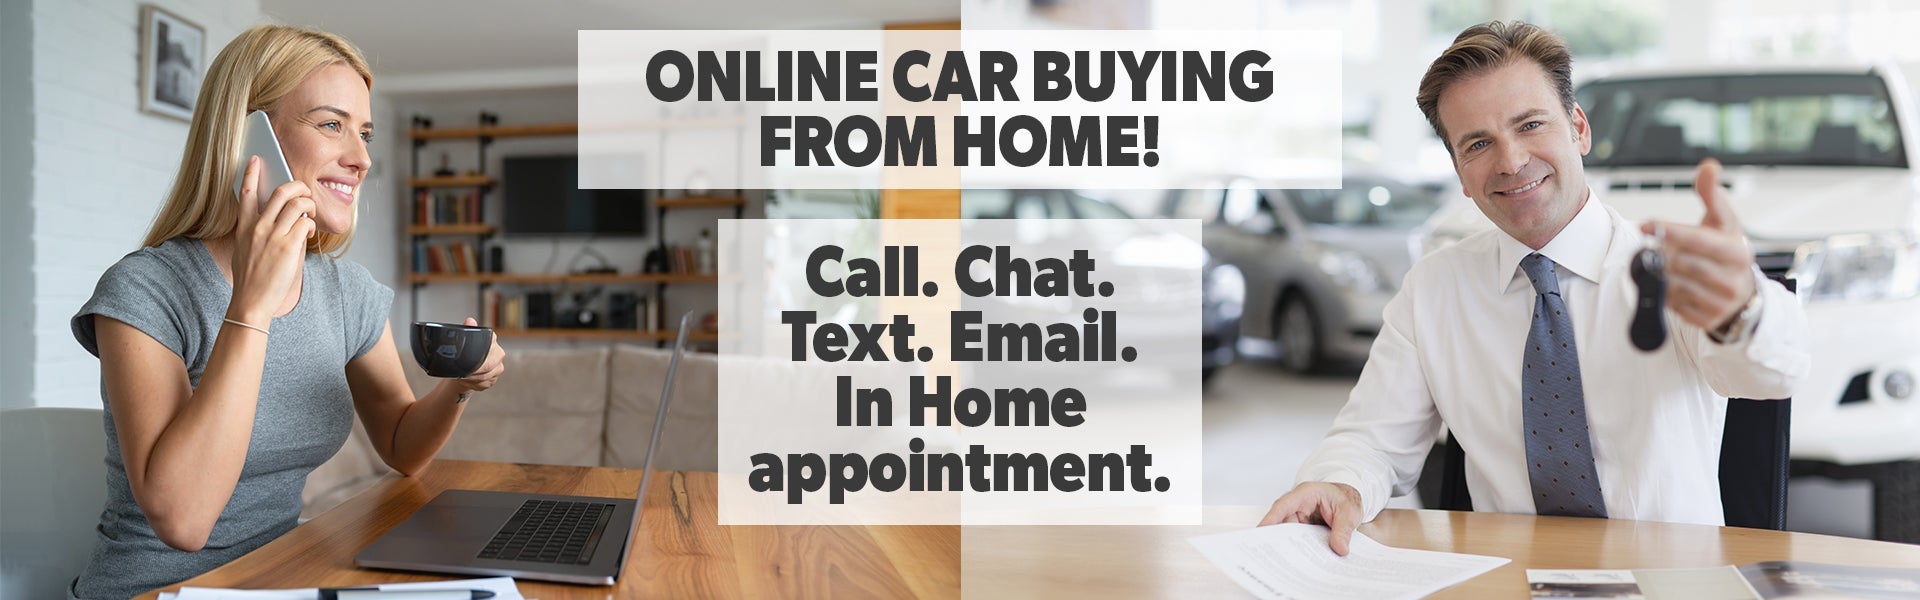 Online Car Buying at Home from Waldorf Ford